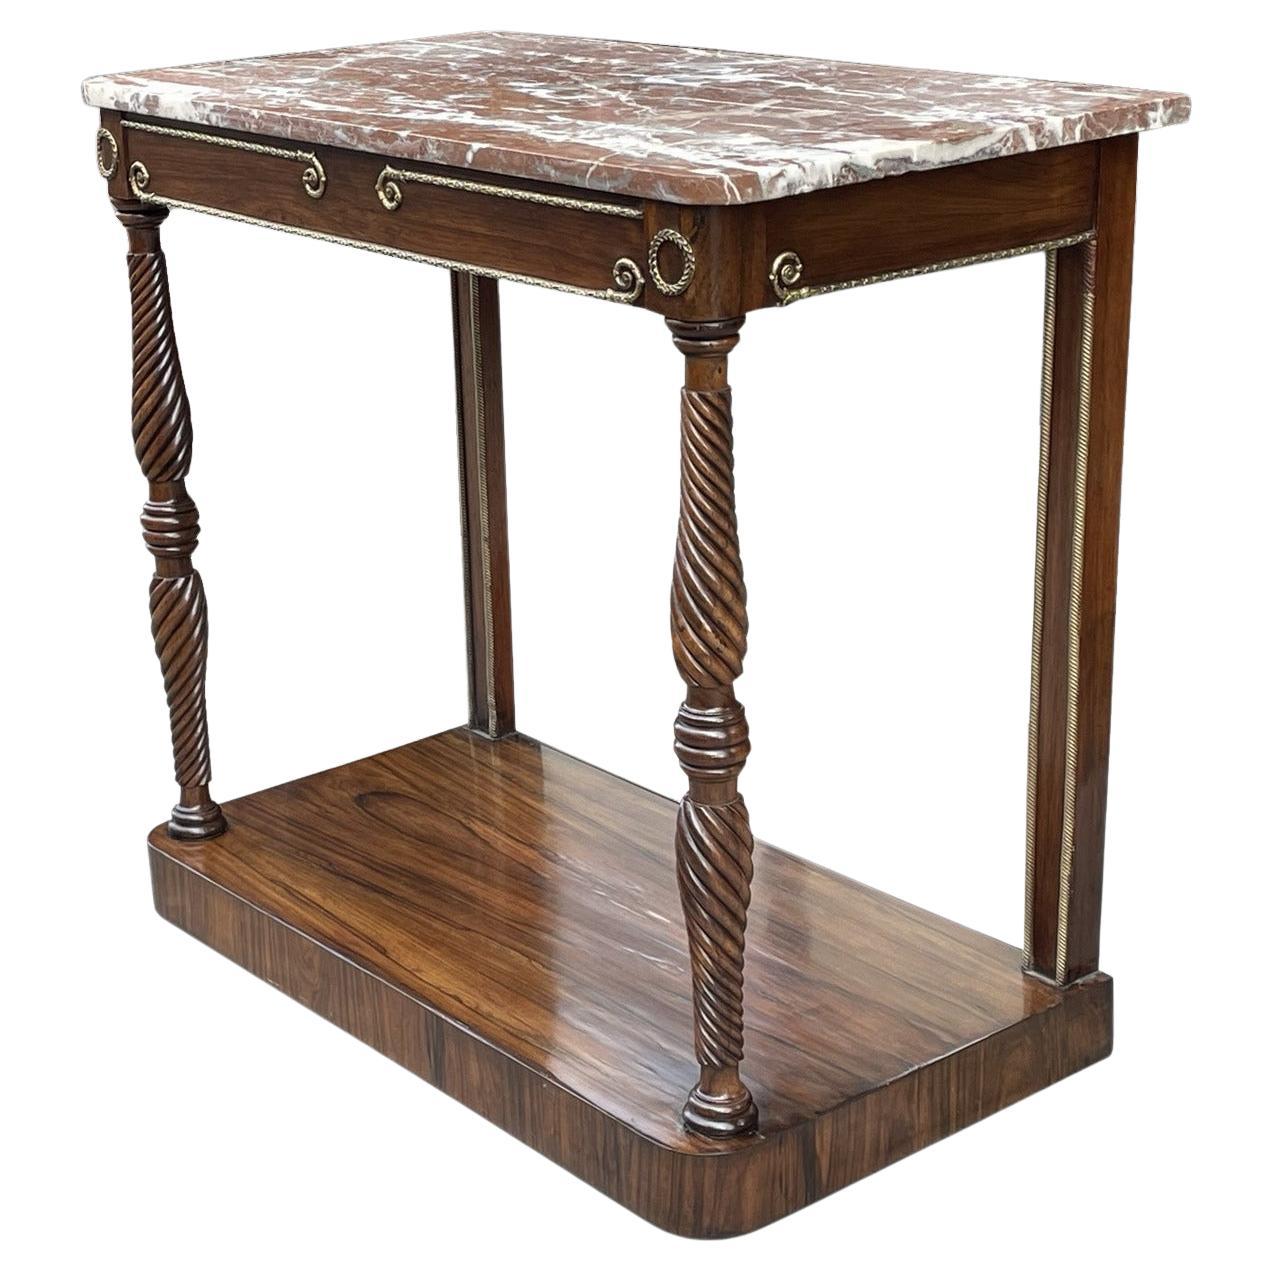 Antique French Regency Rosewood Marble Gilt Mounted French Console Pier Table For Sale